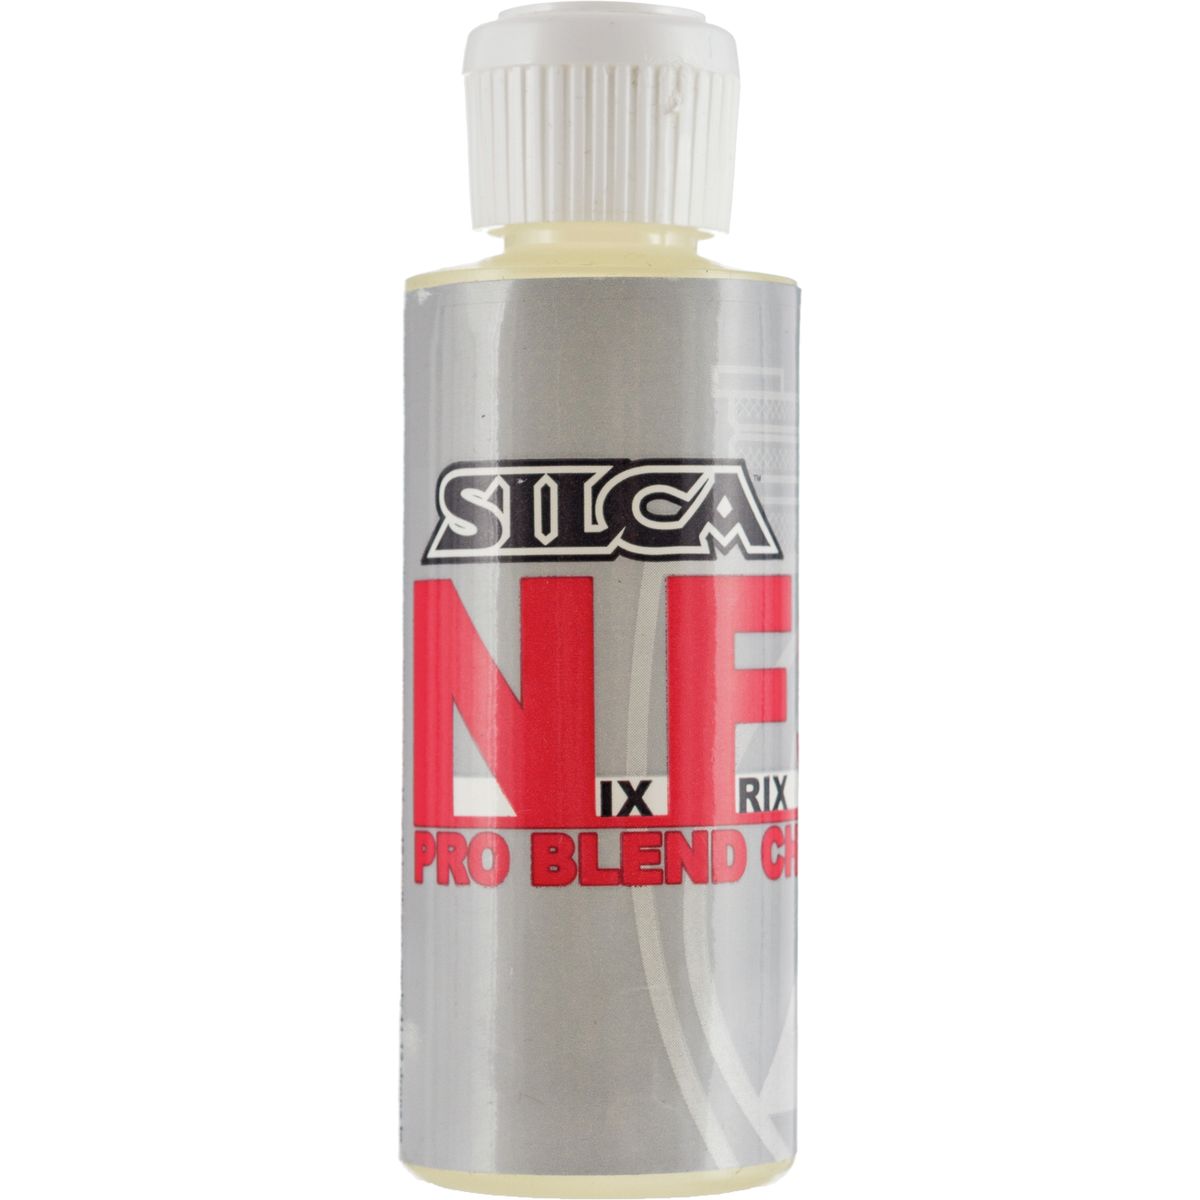 Silca NFS Pro Chain Lube